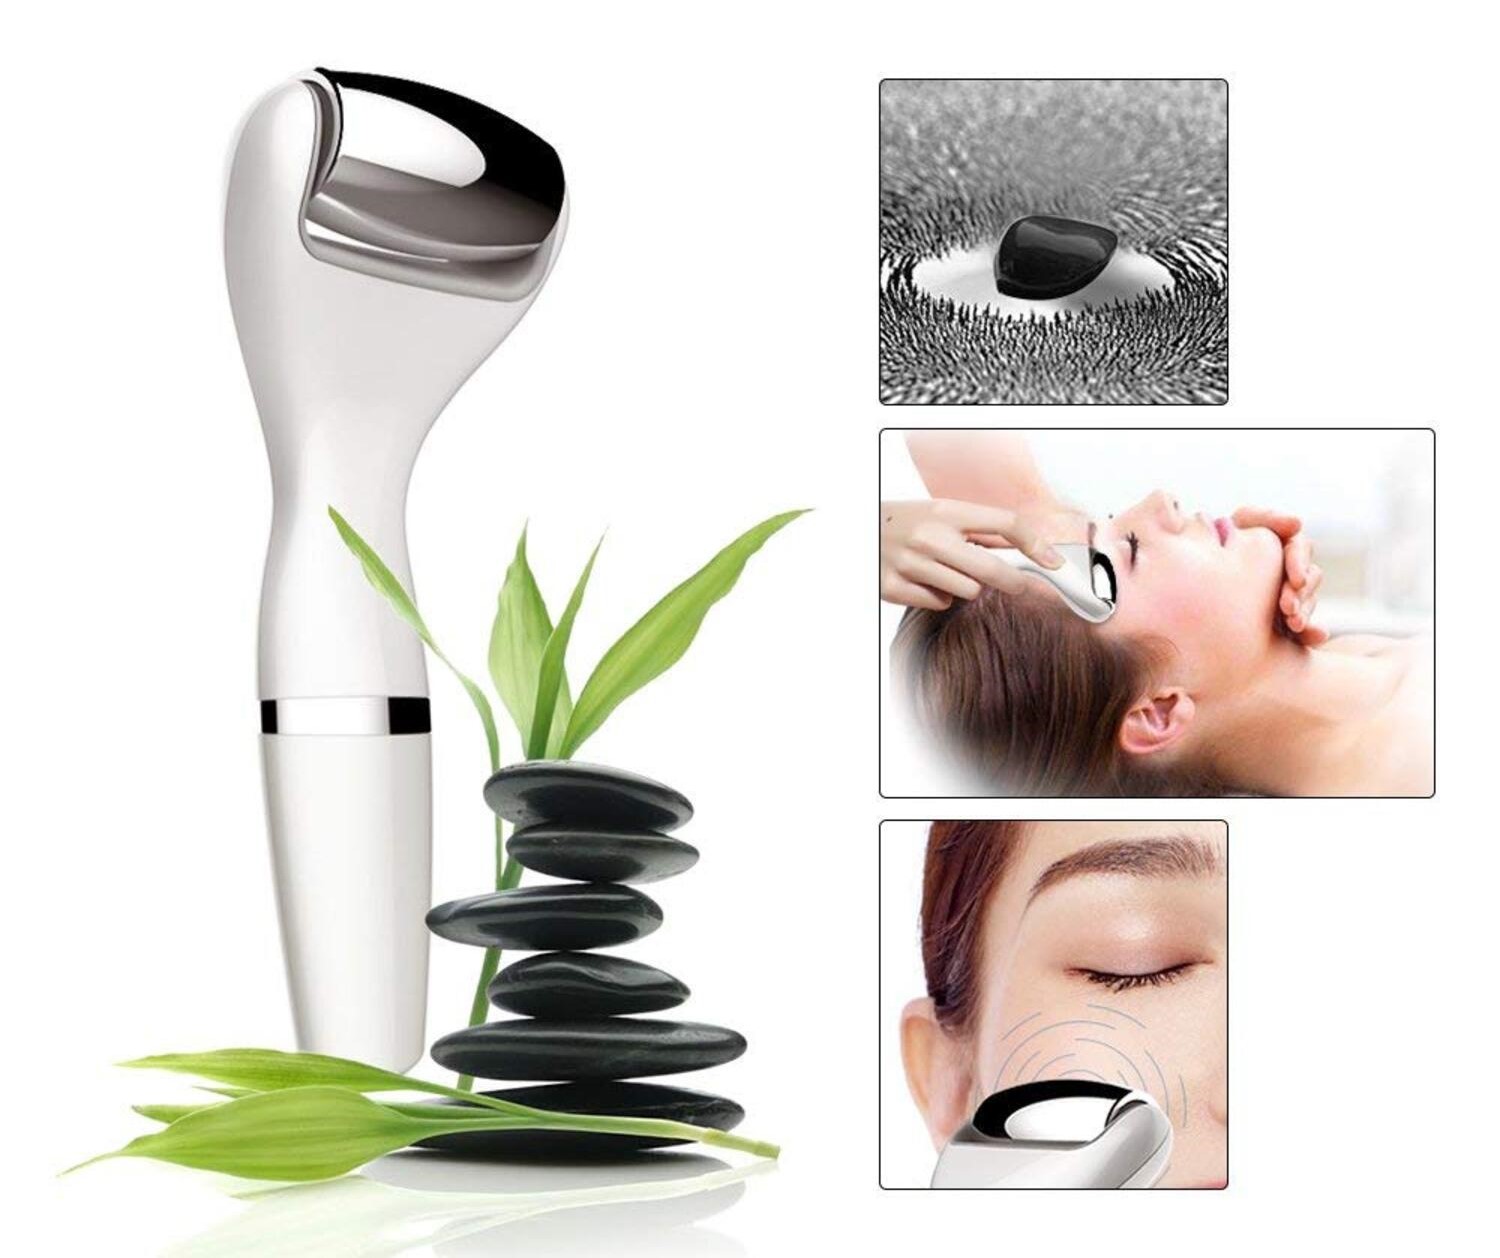 TOUCHBeauty High Frequency Vibration Face Body Roller Massager